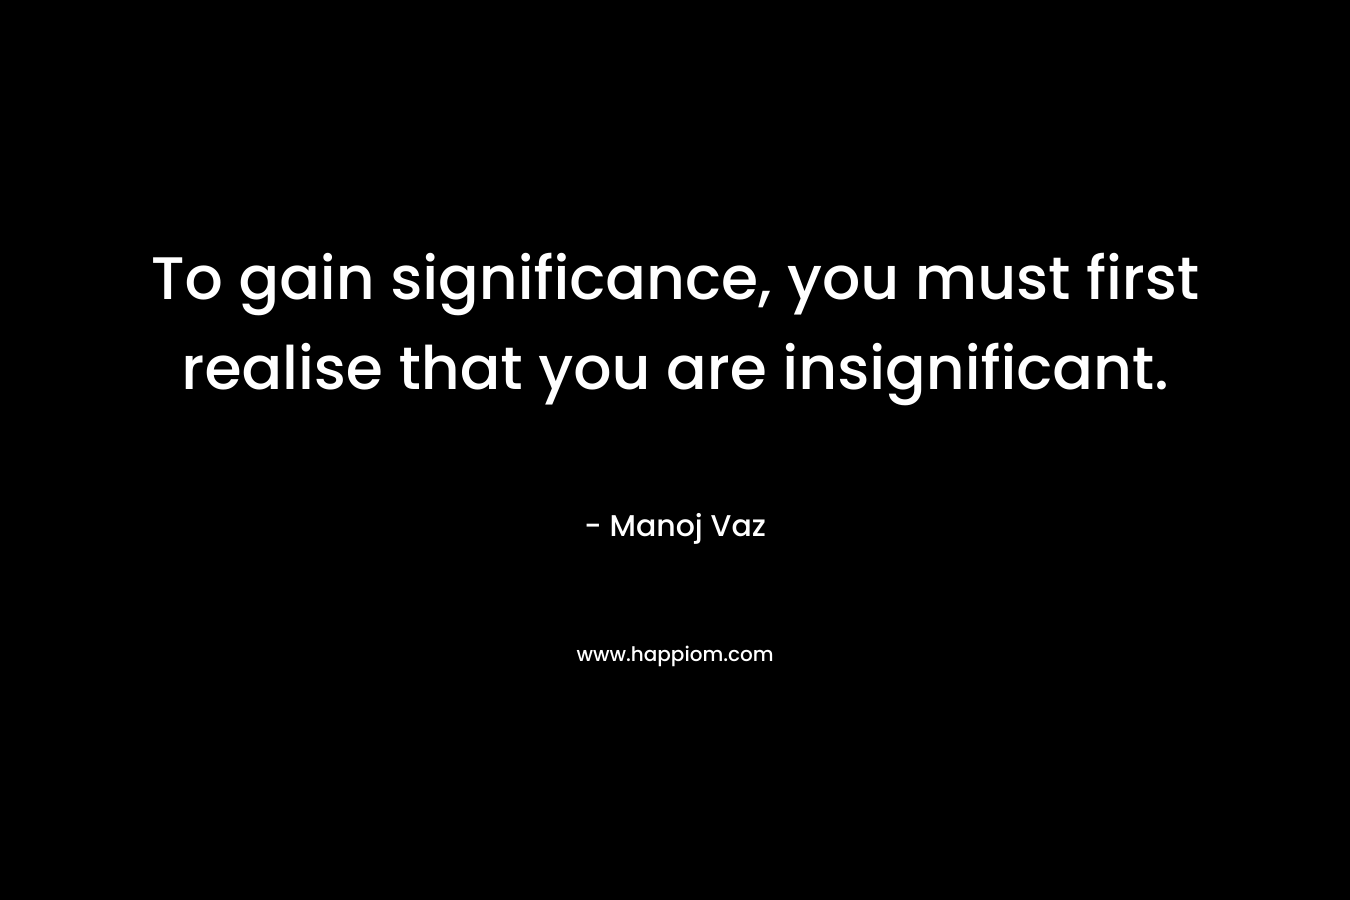 To gain significance, you must first realise that you are insignificant. – Manoj Vaz